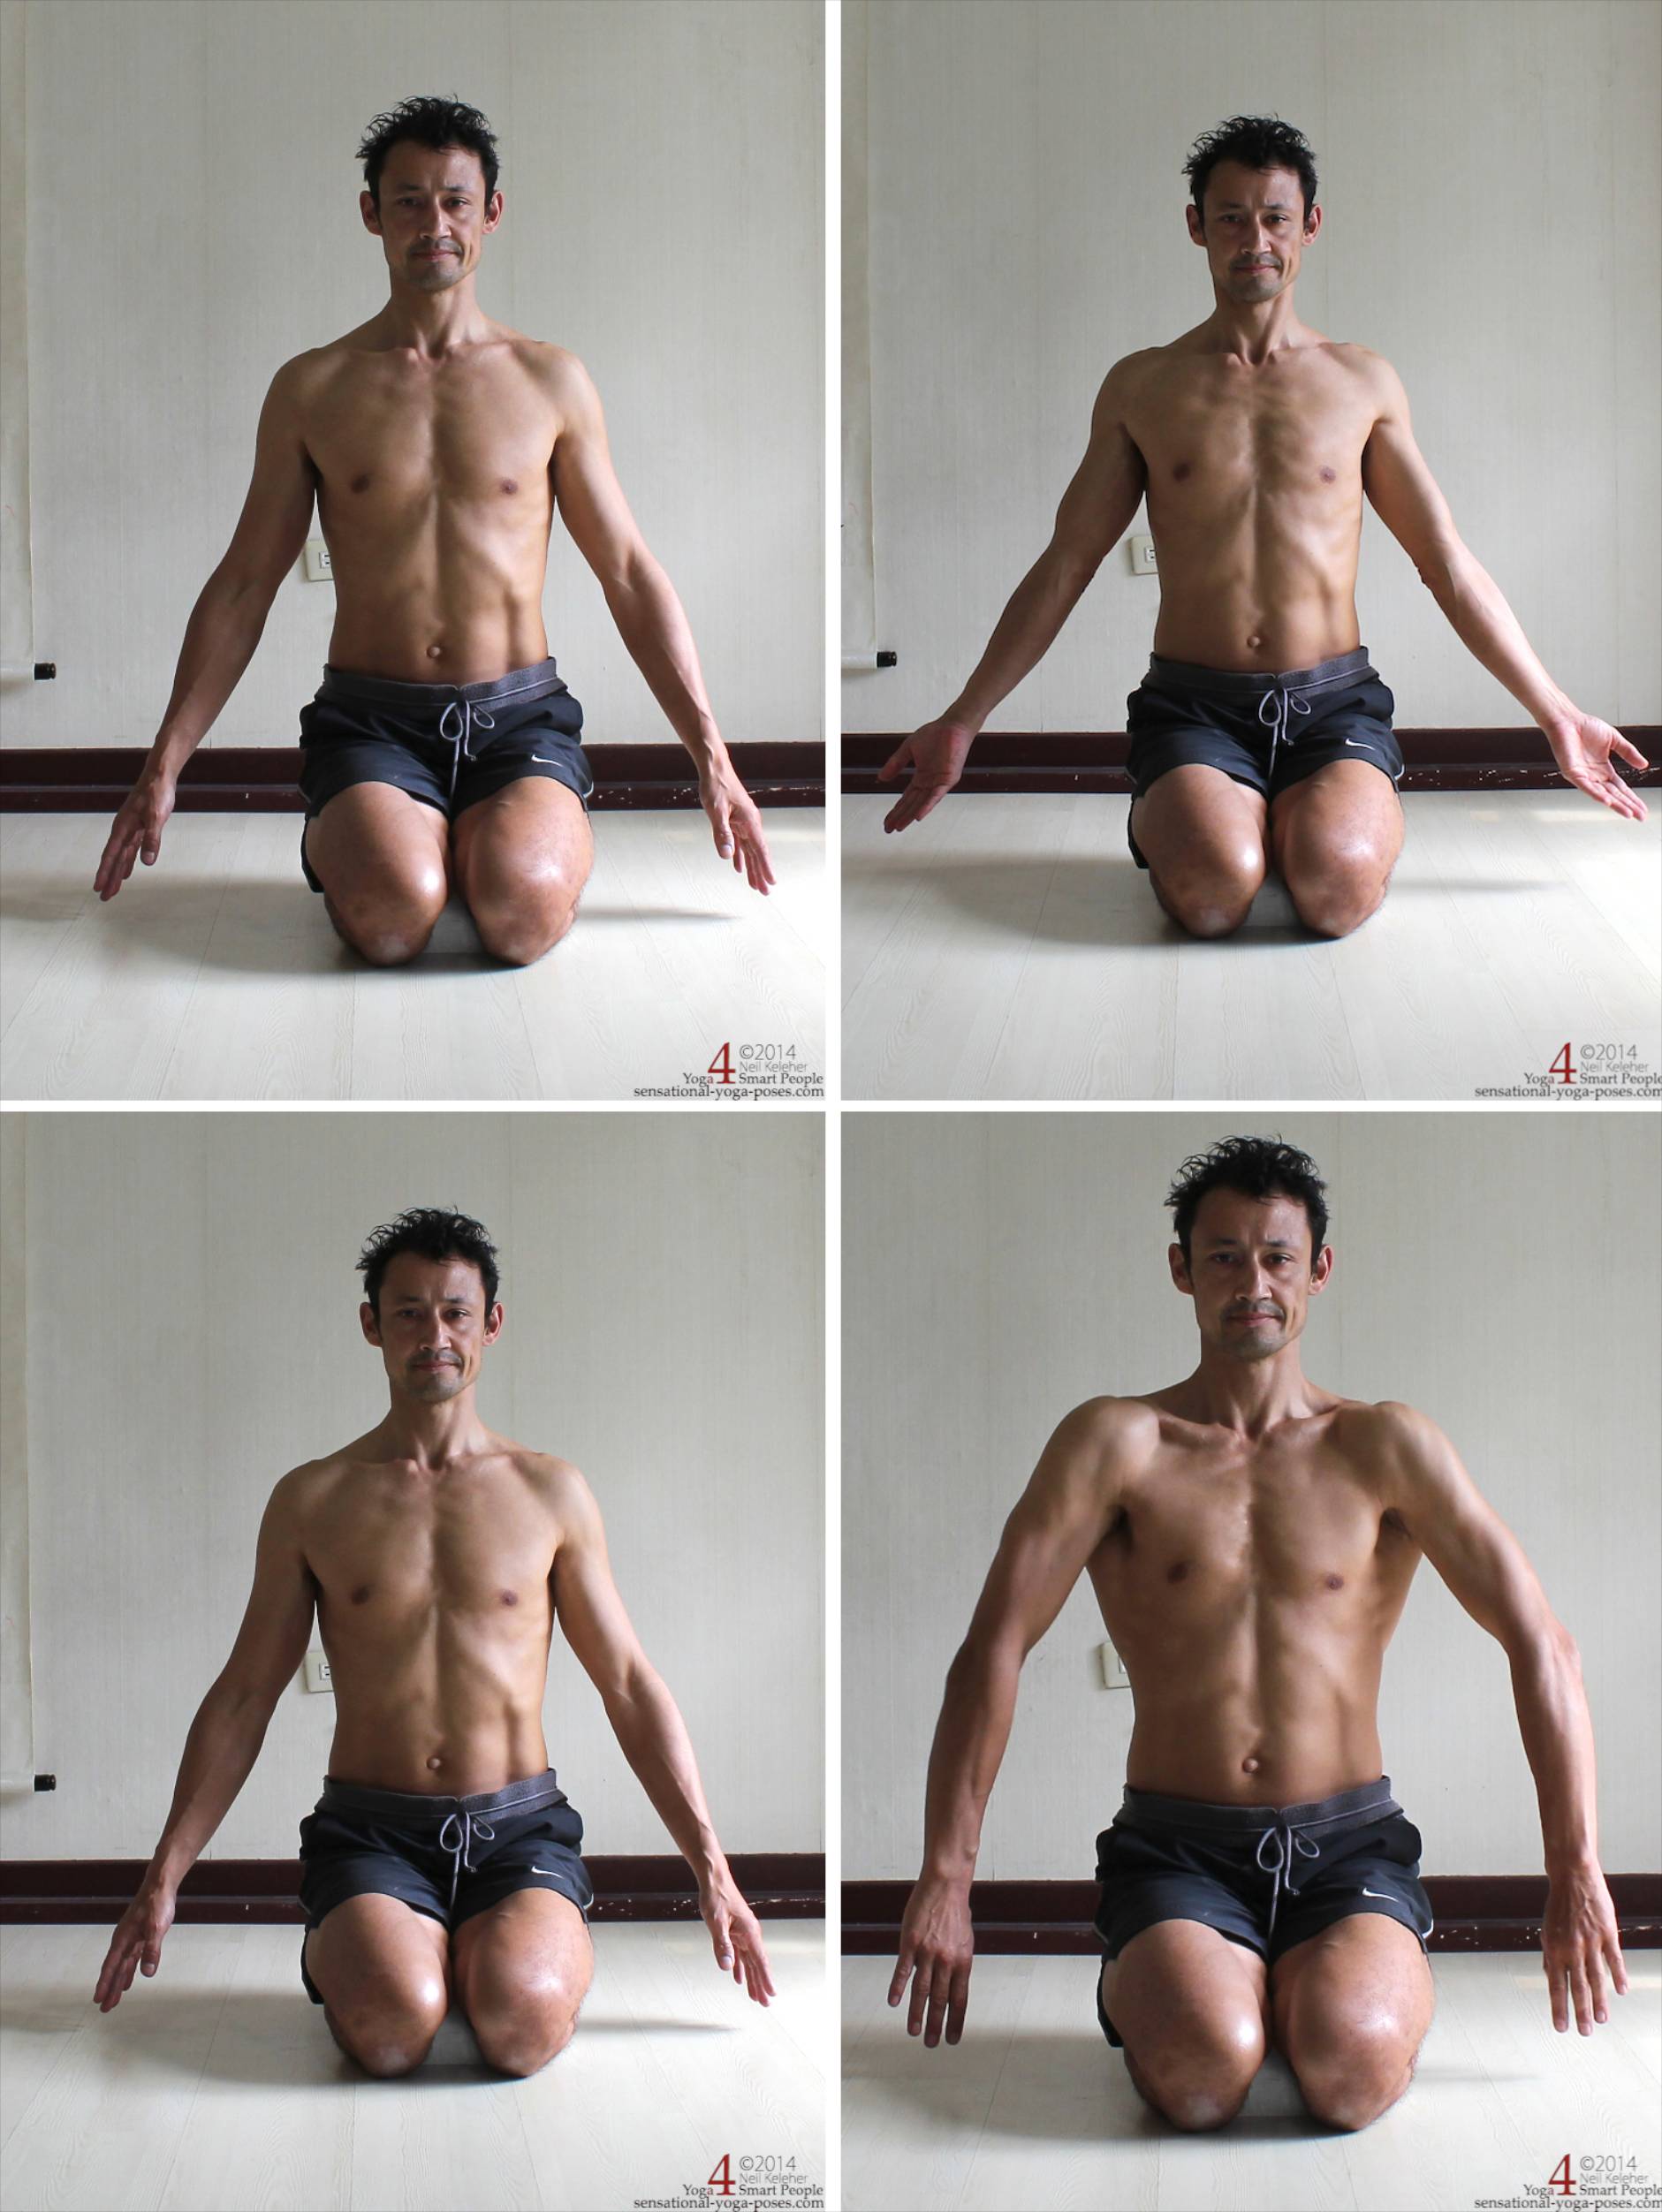 Arms Down by Sides: 1. Neutral. 2. Externally rotated. 3. Neutral. 4. Internally rotated.